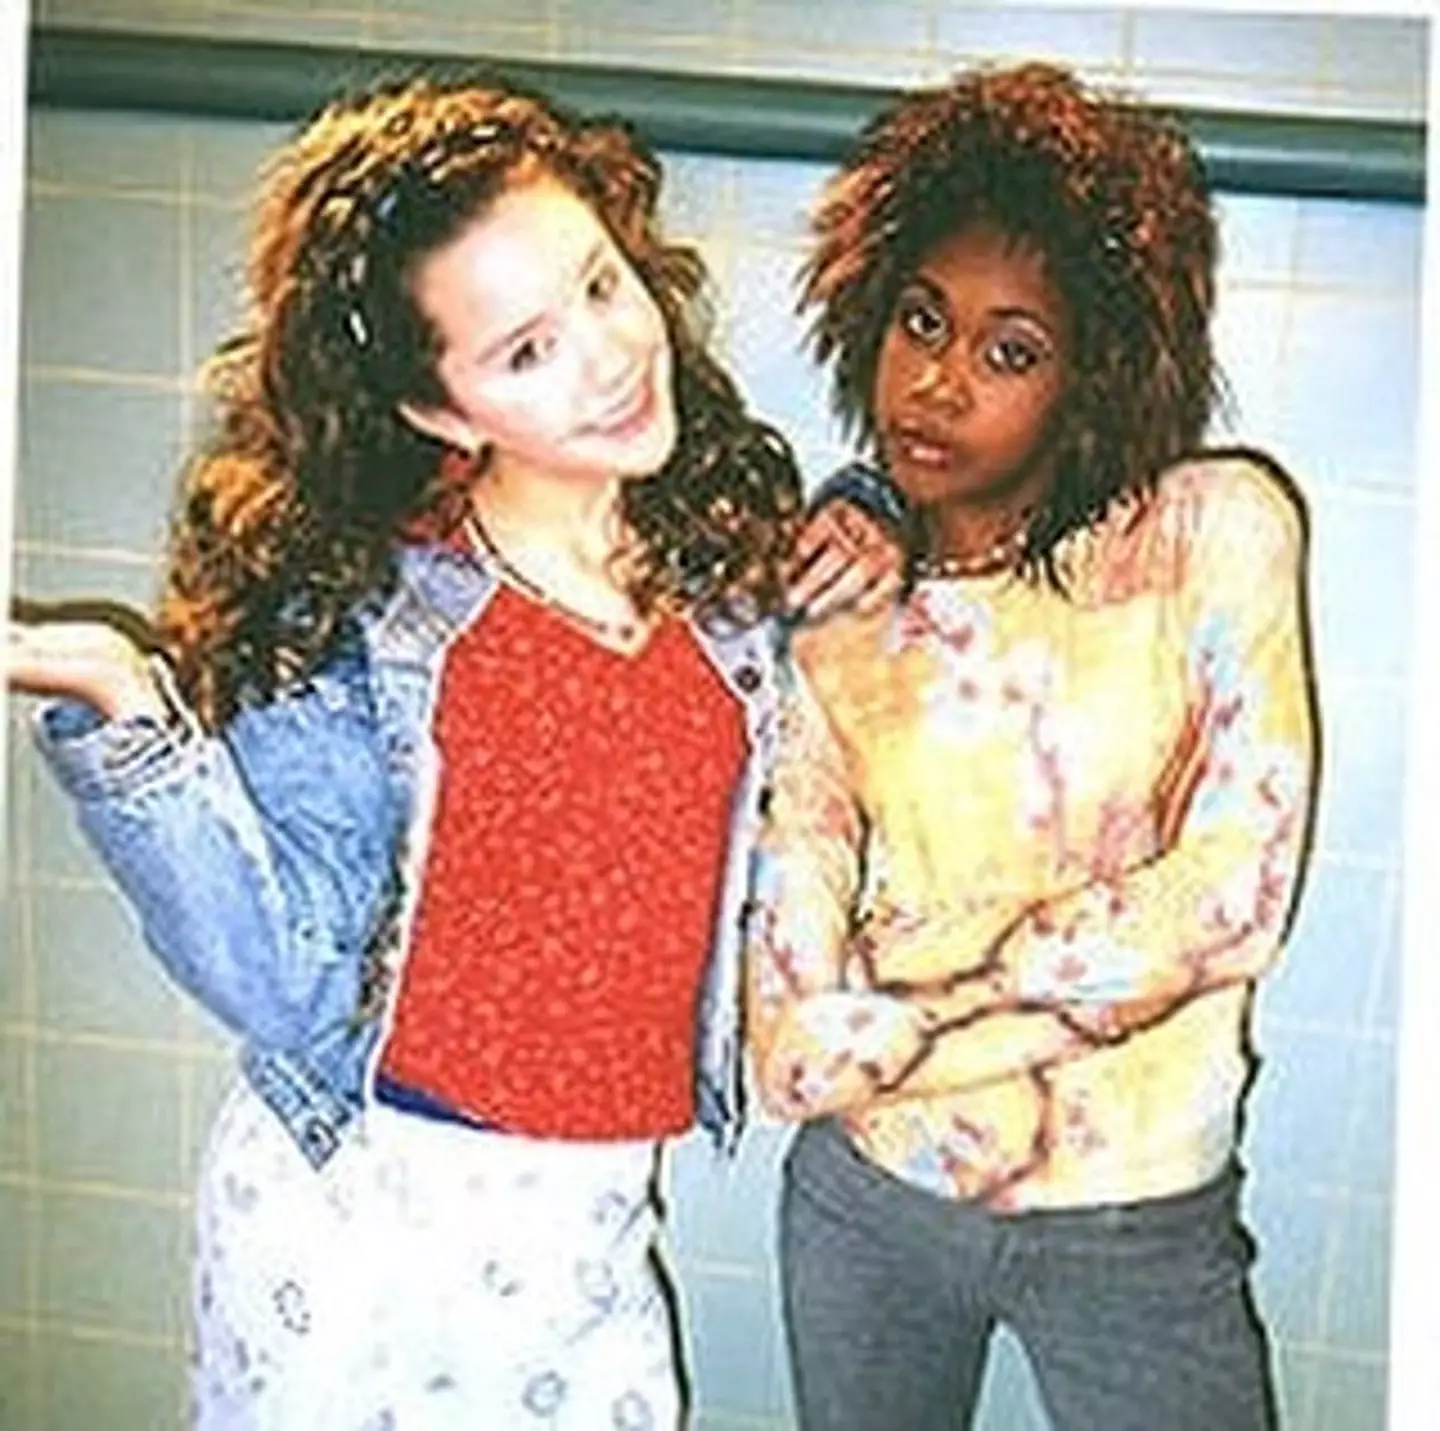 Raquel Lee Bolleau says Amanda Bynes repeatedly spat in her fact on the set of The Amanda Show.